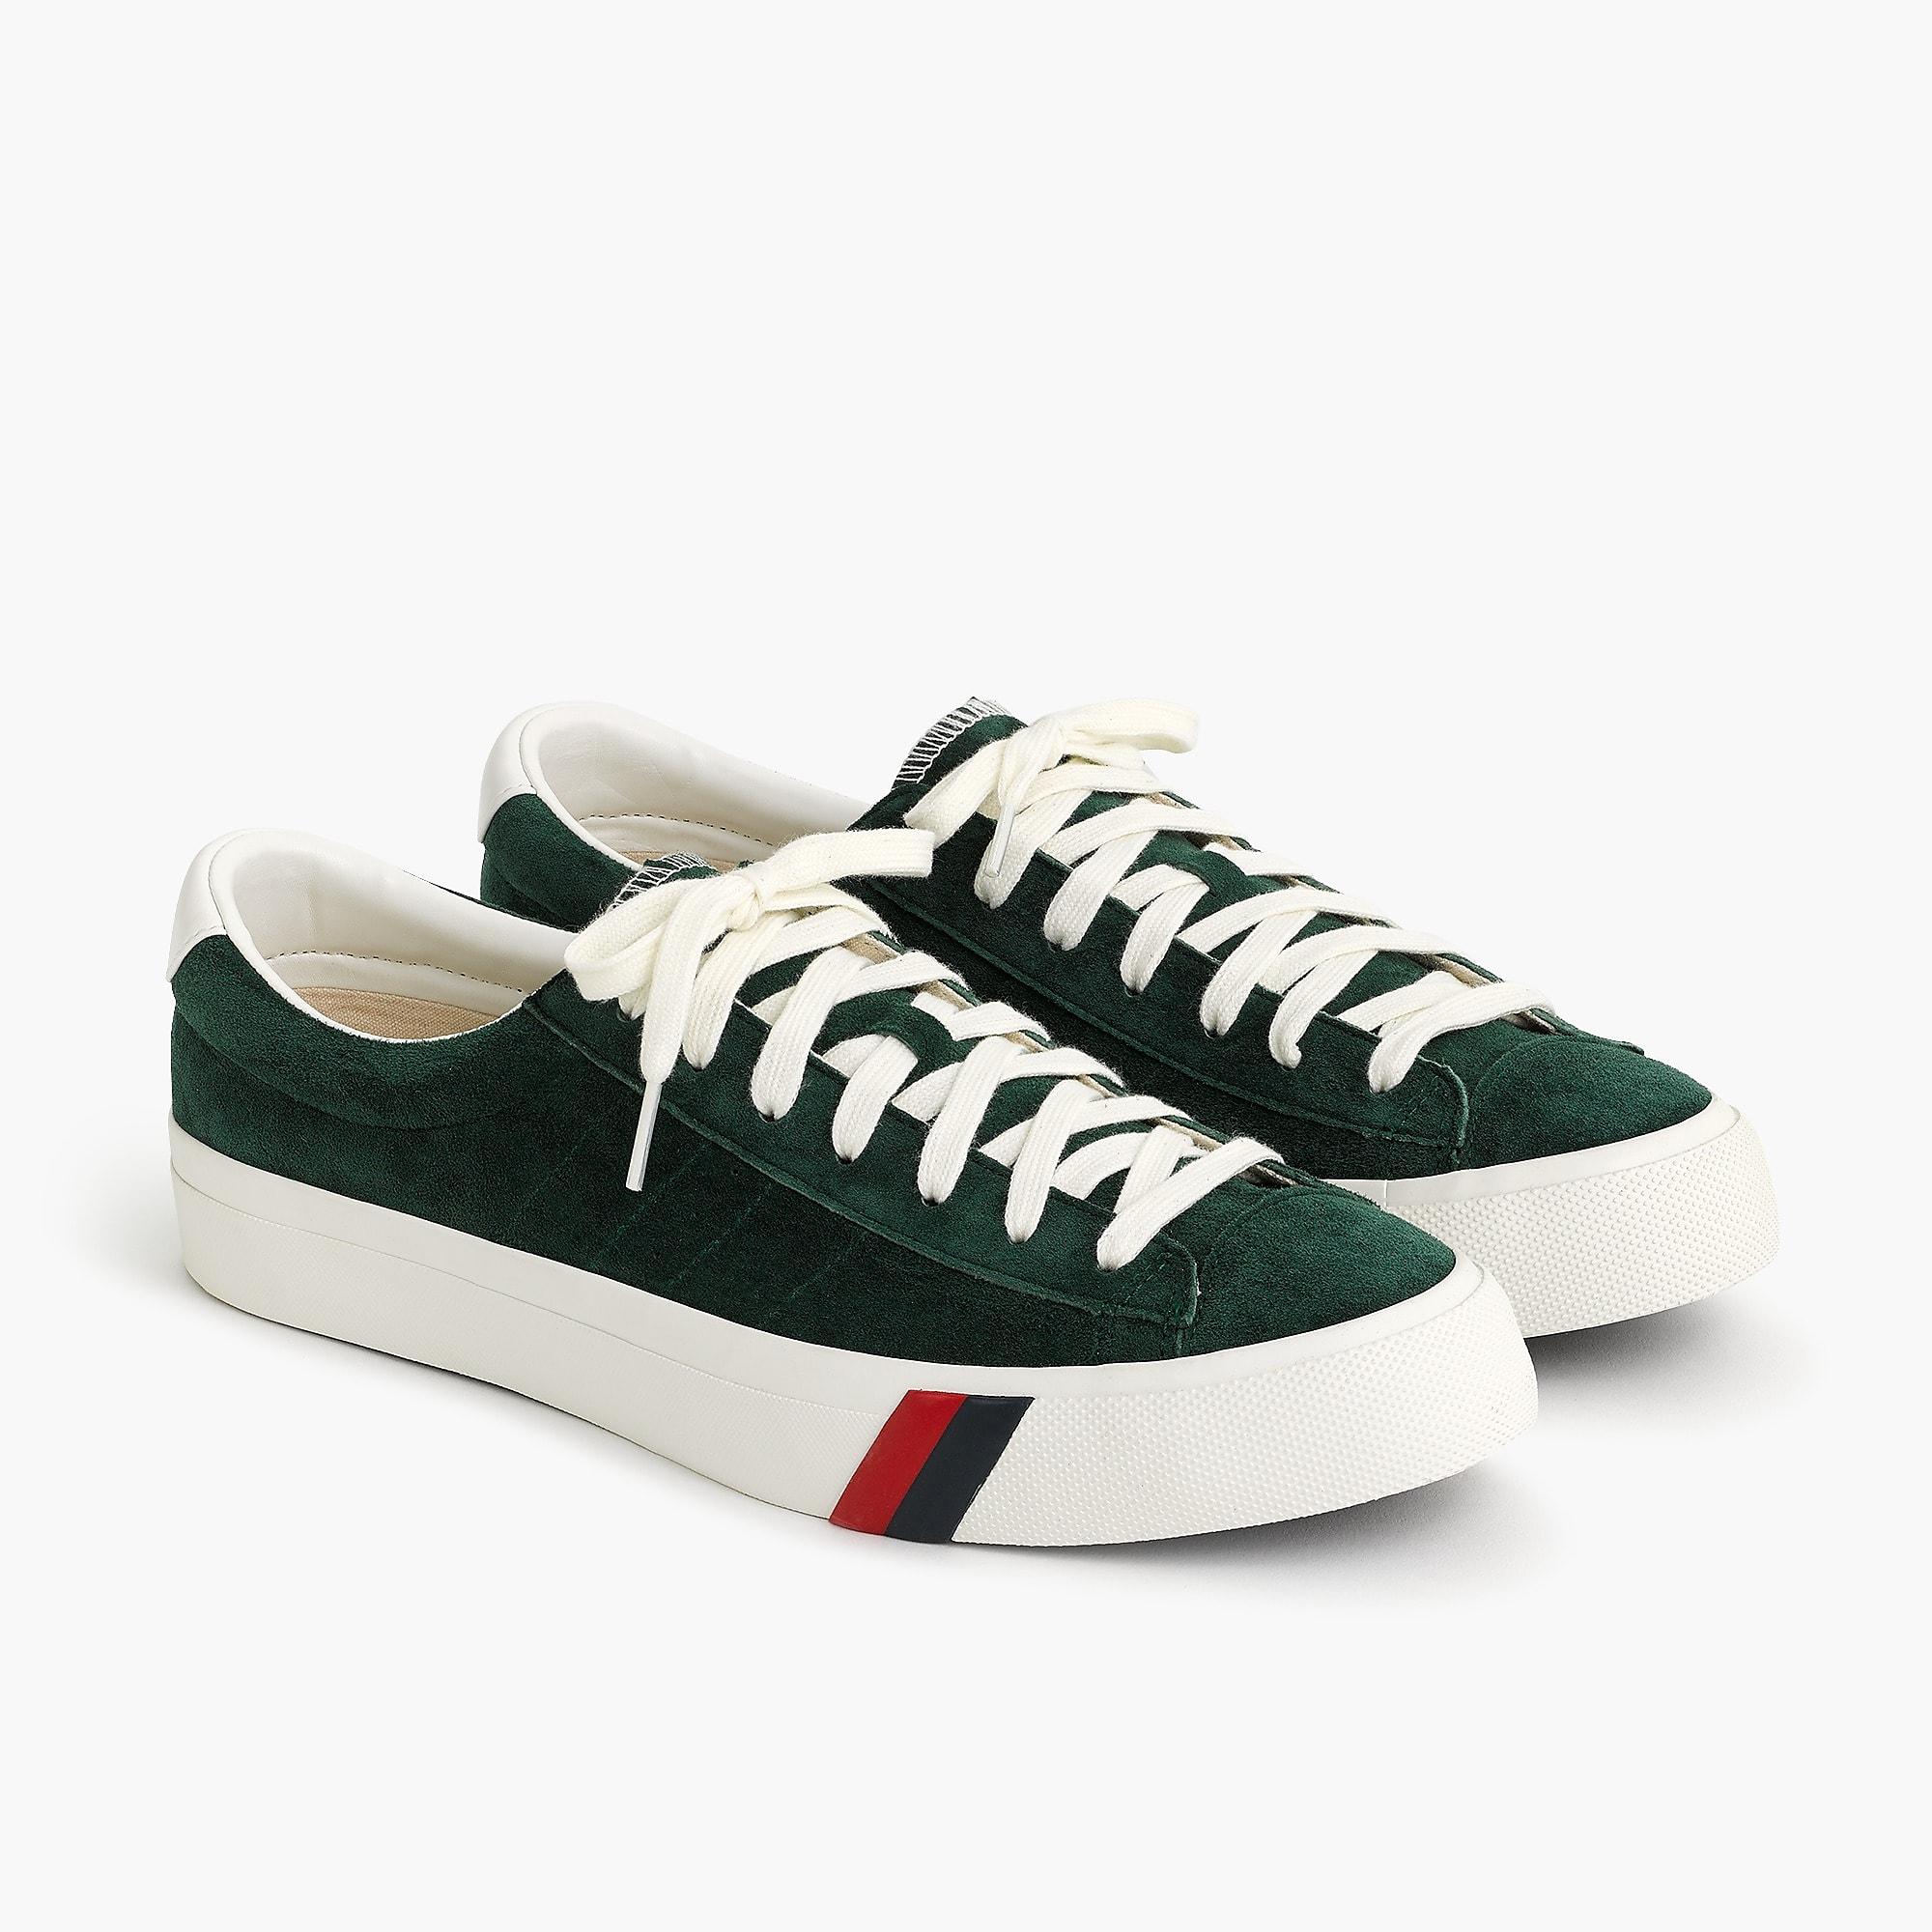 Pro Keds X Only Ny Suede Royal Plus Sneakers in Green for Men - Lyst